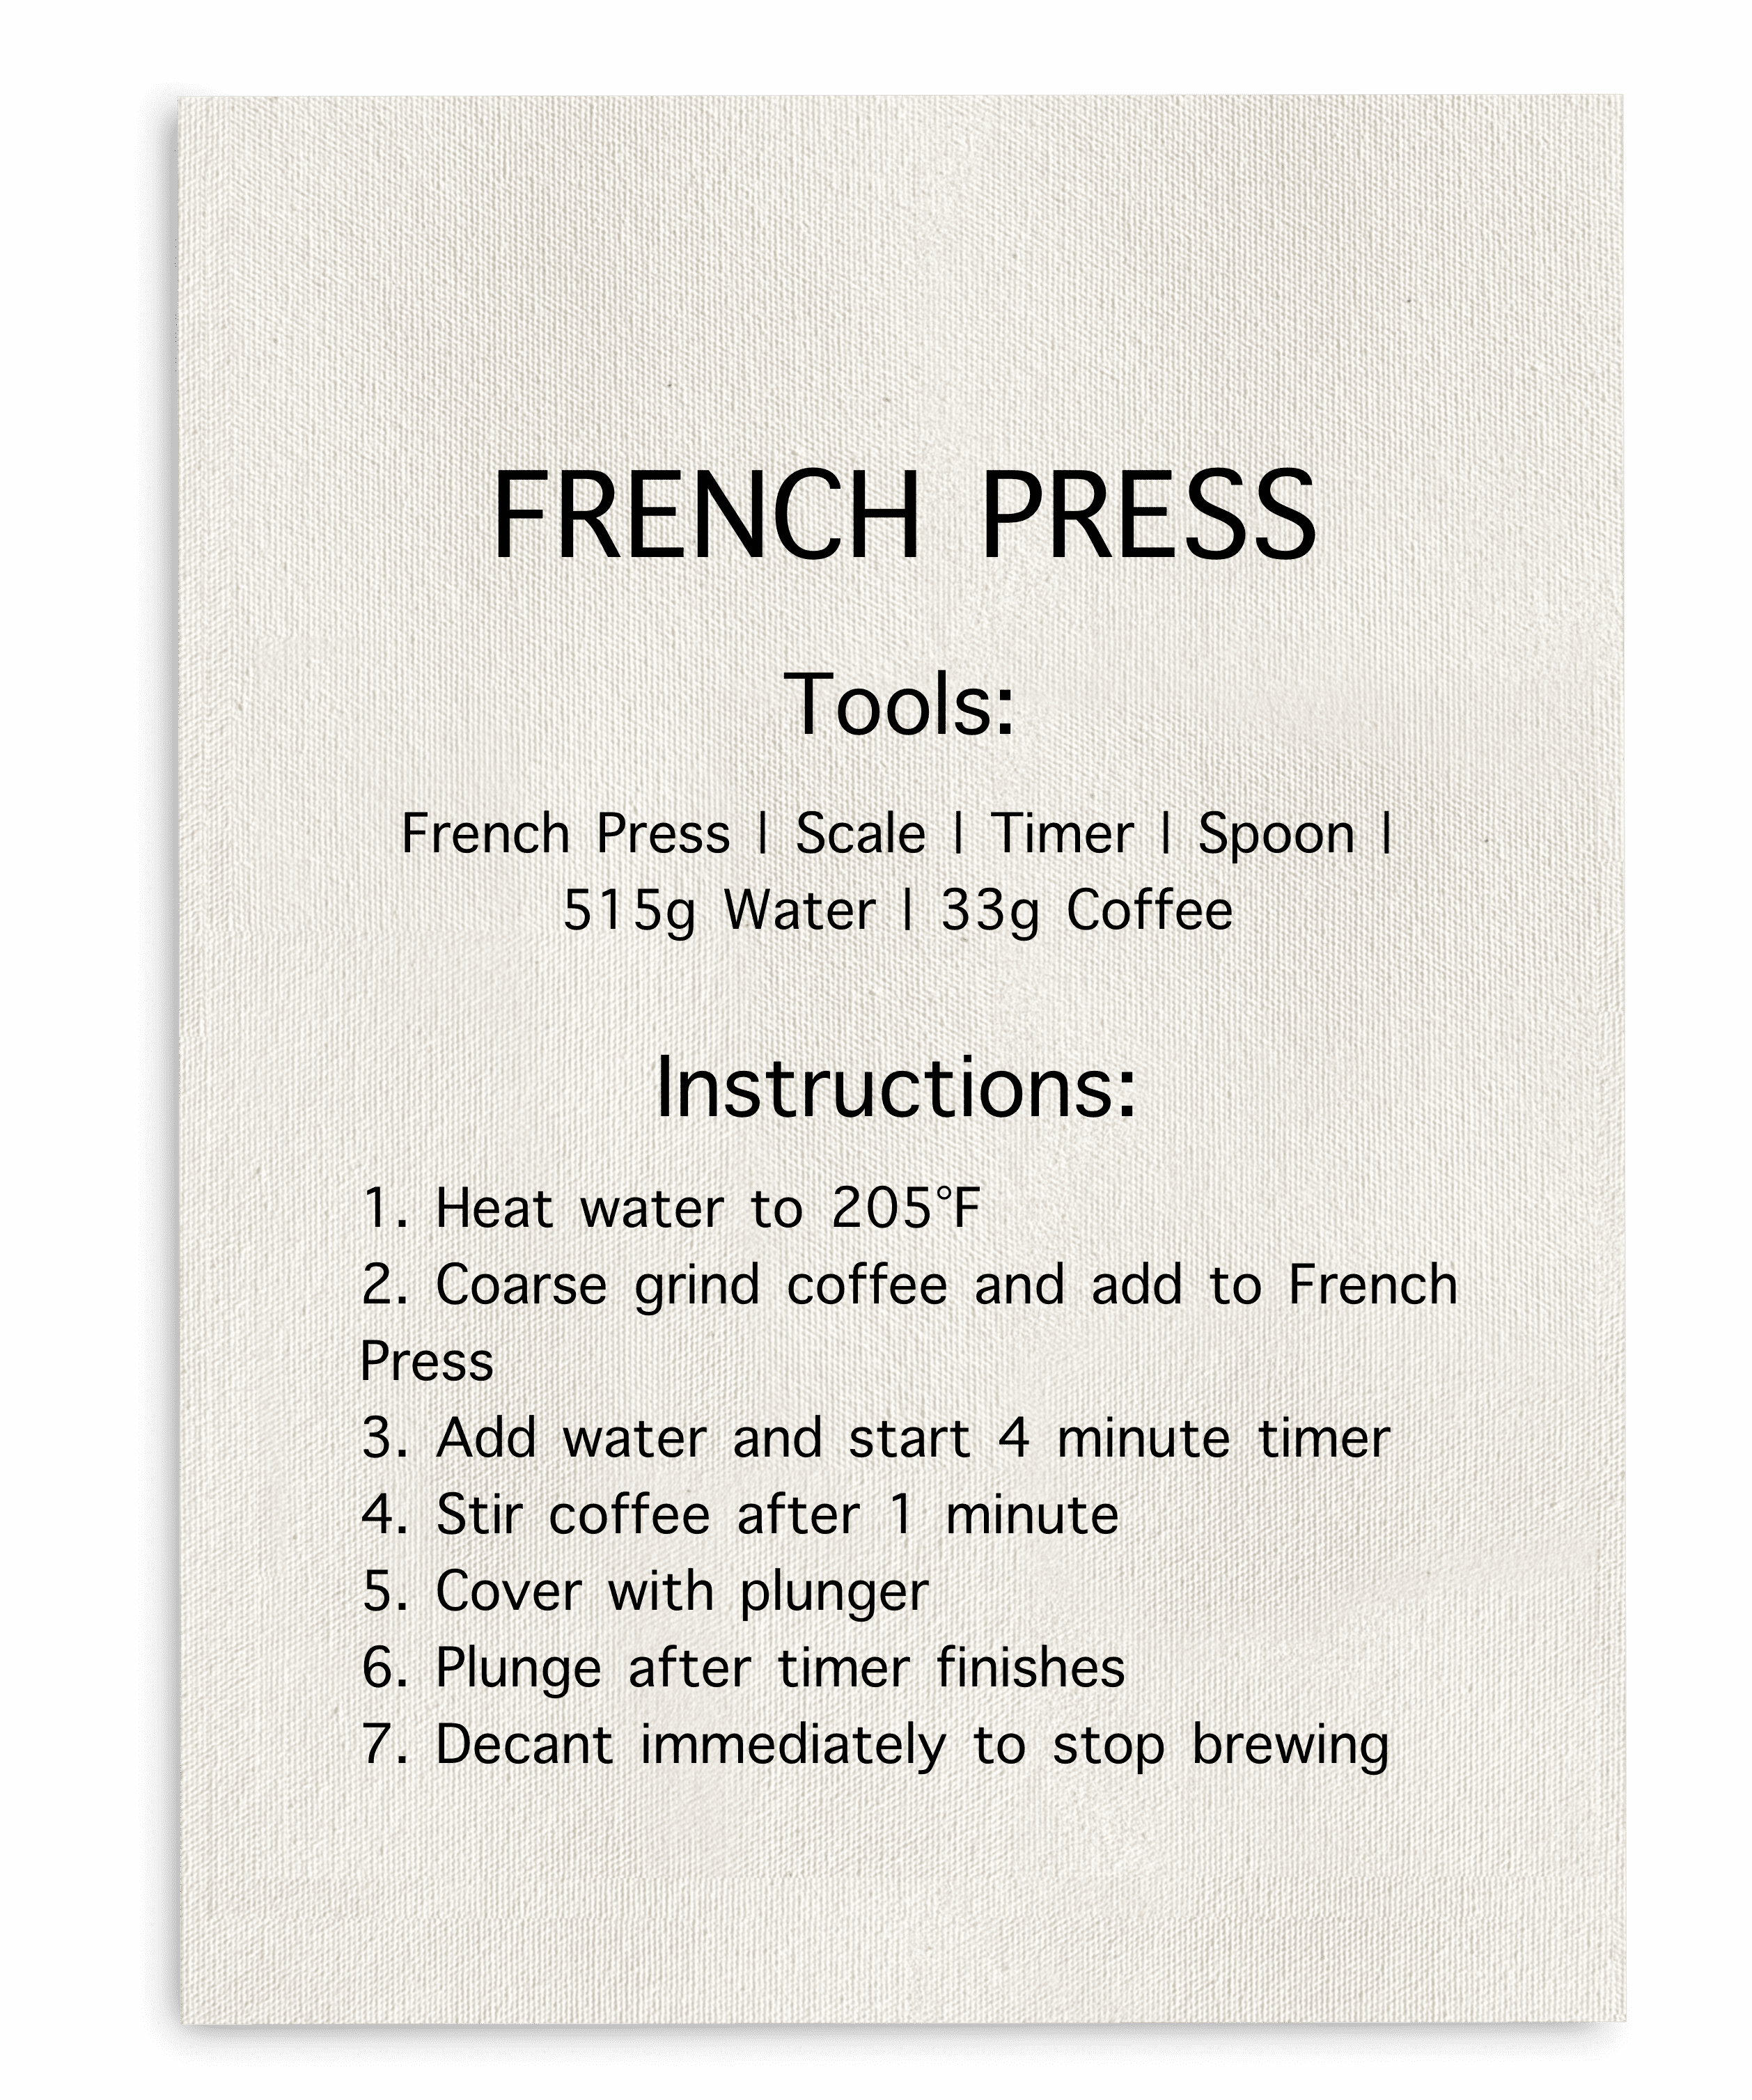 Cips Coffee Roasters Coffee Club Brew Tips for French Press